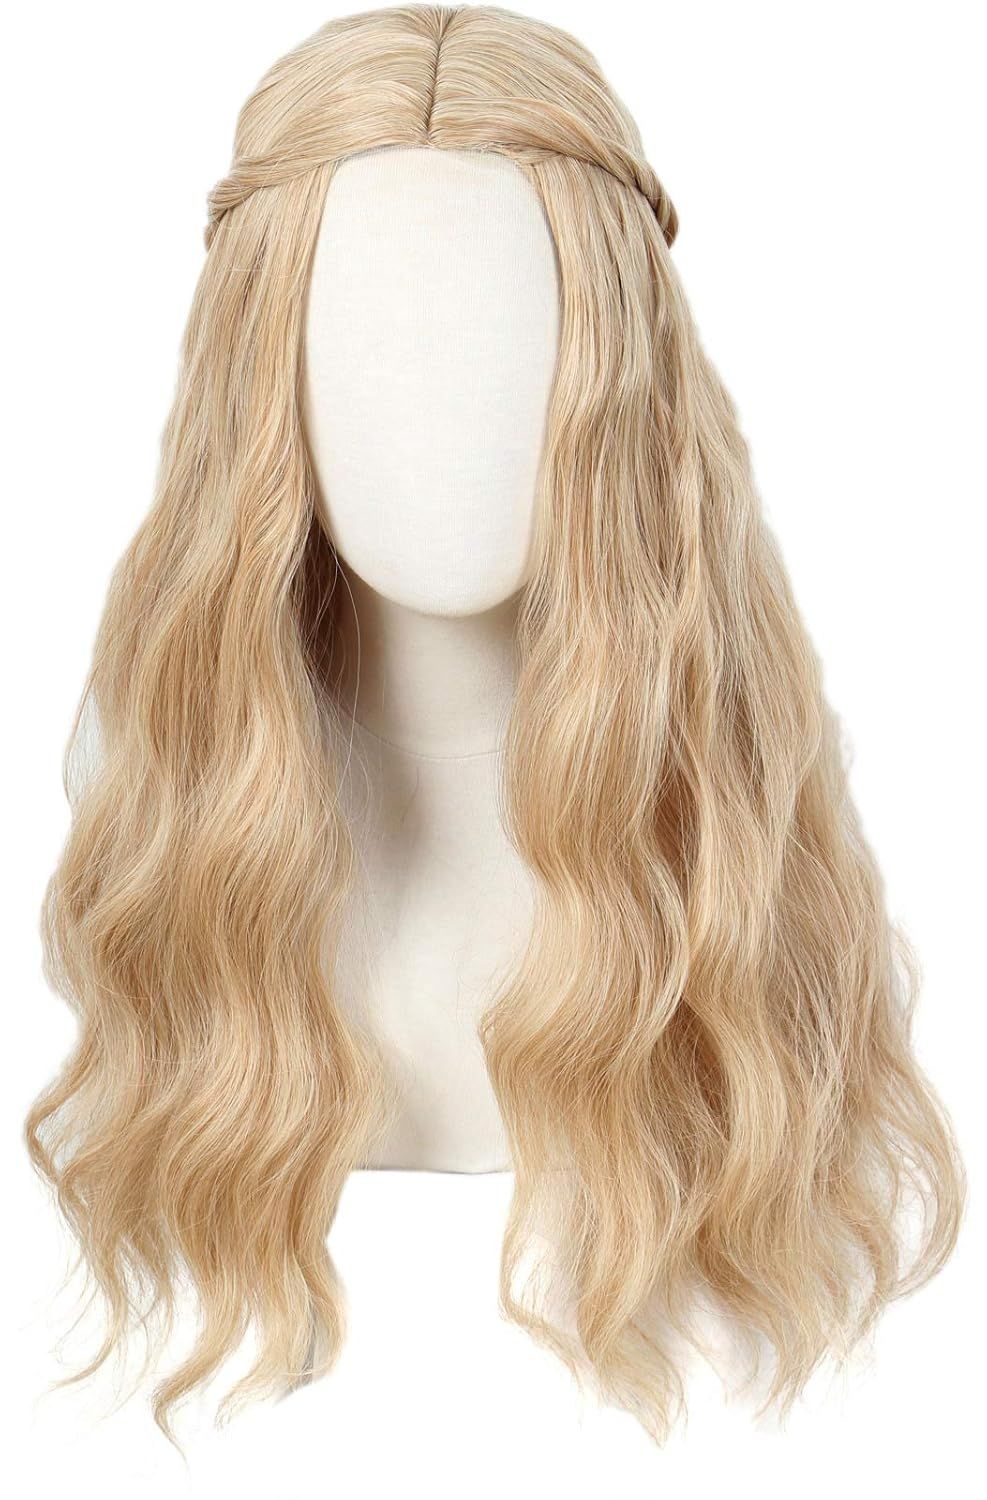 Linfairy Long Wavy Wigs Halloween Cosplay Costume Wig for Women Party | Amazon (US)